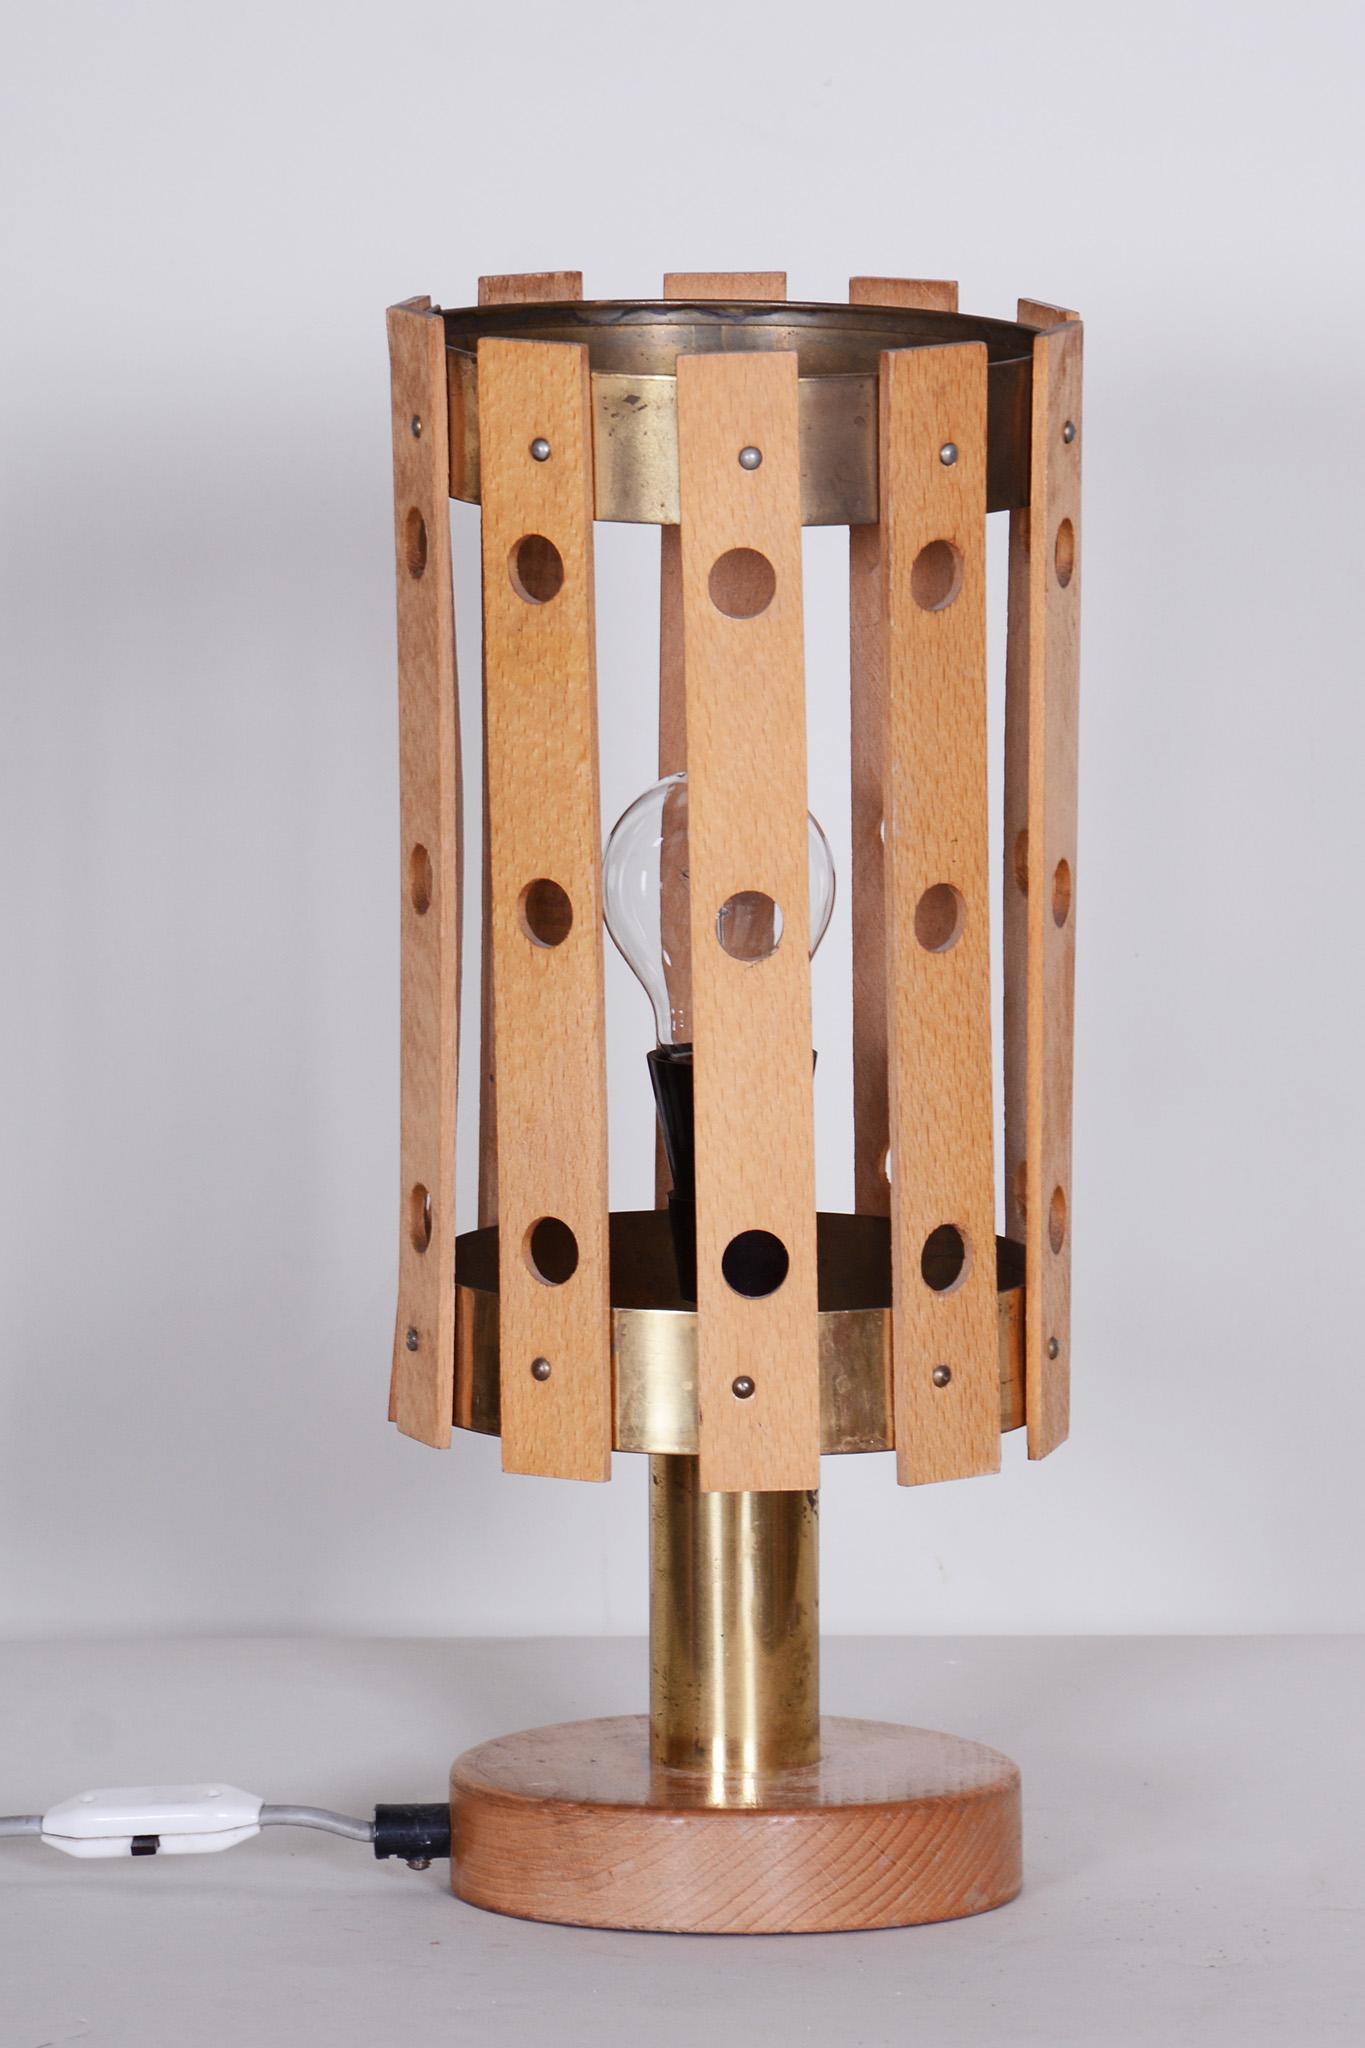 Midcentury Table Lamp, Beech, Brass, Made by Pokrok Zilina, Slovakia, 1960s In Good Condition For Sale In Horomerice, CZ